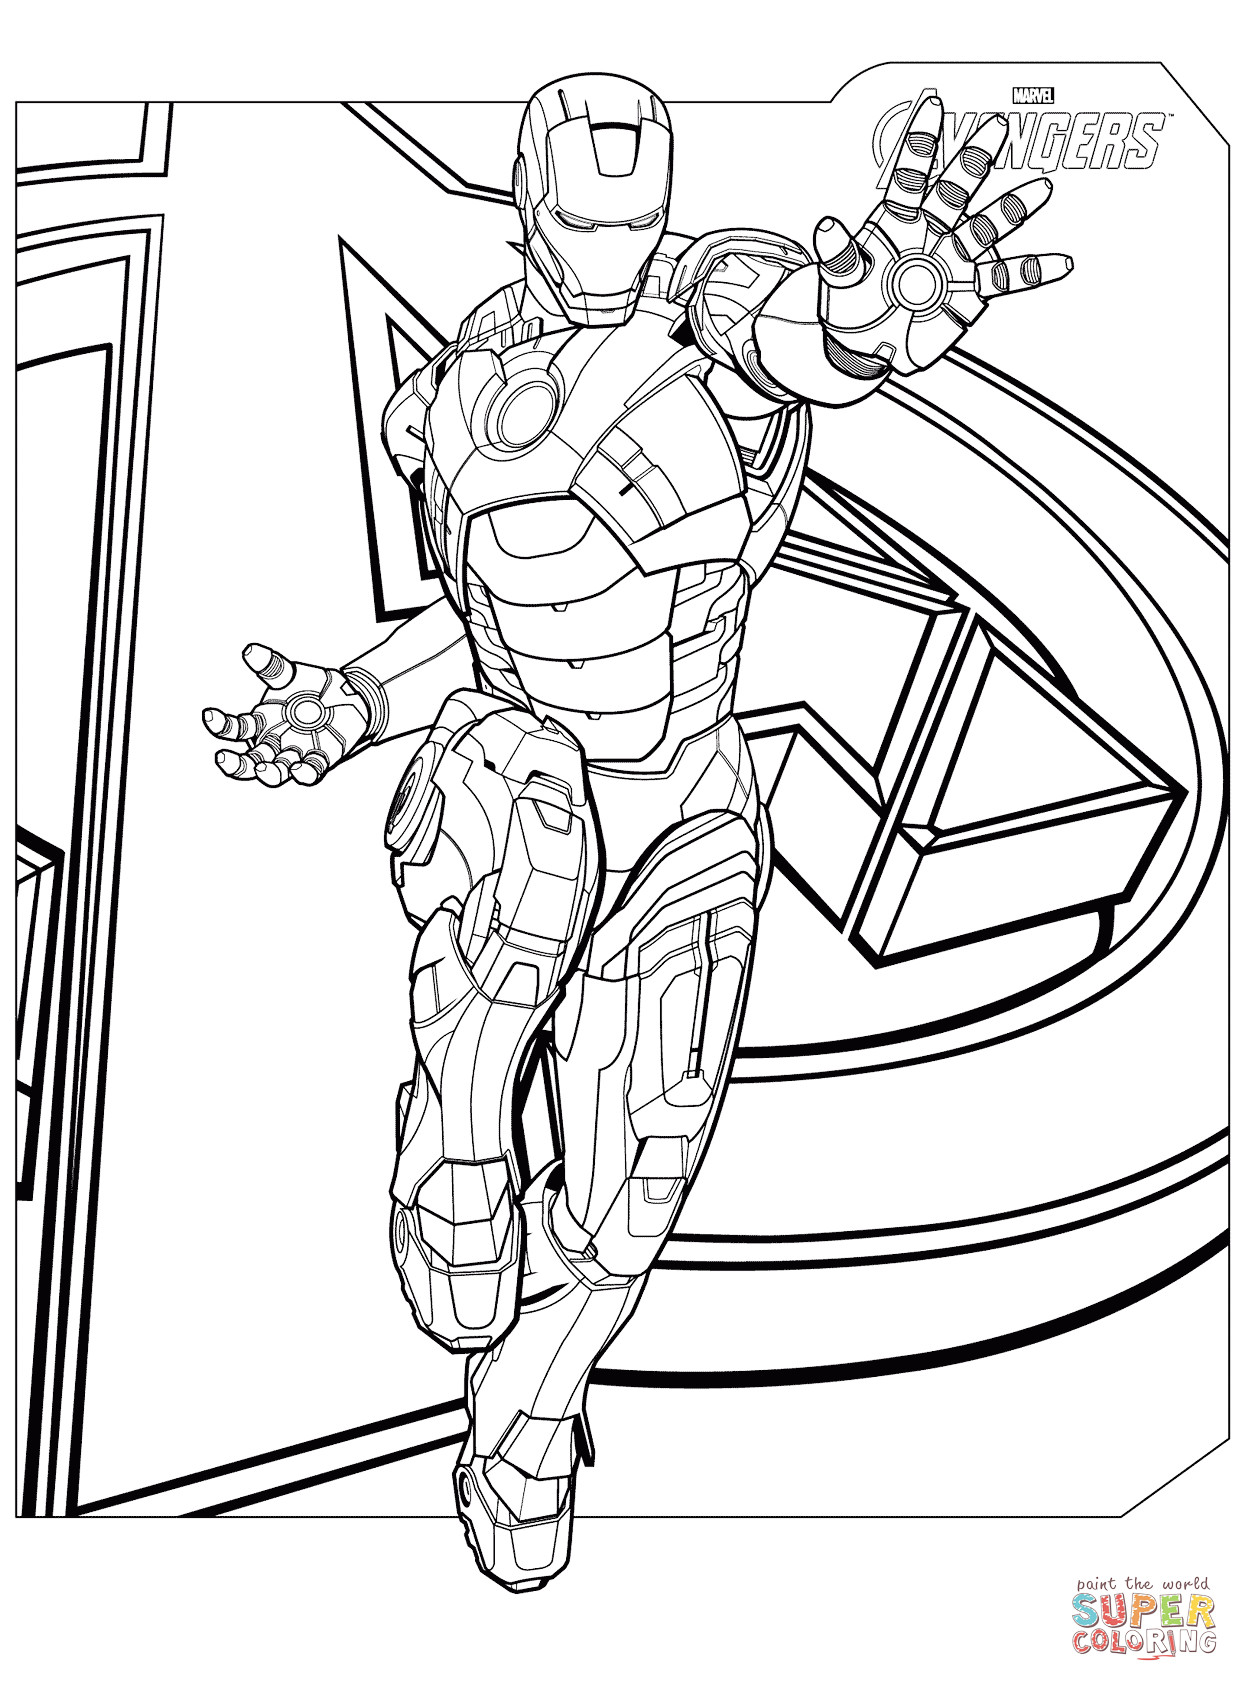 Avengers Printable Coloring Pages
 Avengers Iron Man coloring page